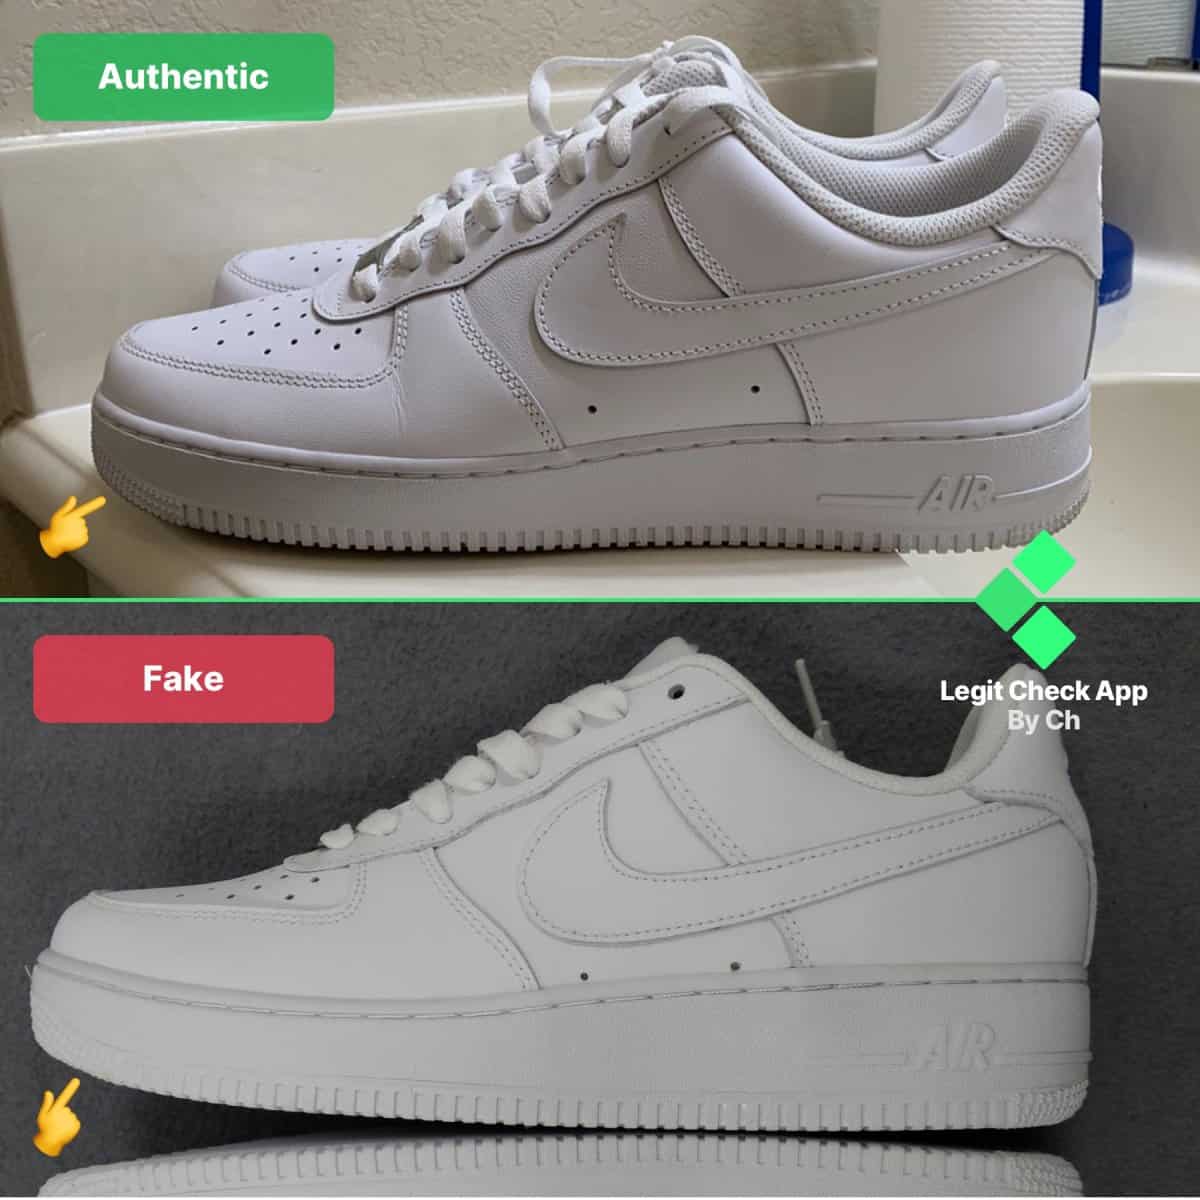 Morgue Regeneration pay How You Can Spot Fake Nike Air Force 1 In 2023 - Legit Check By Ch